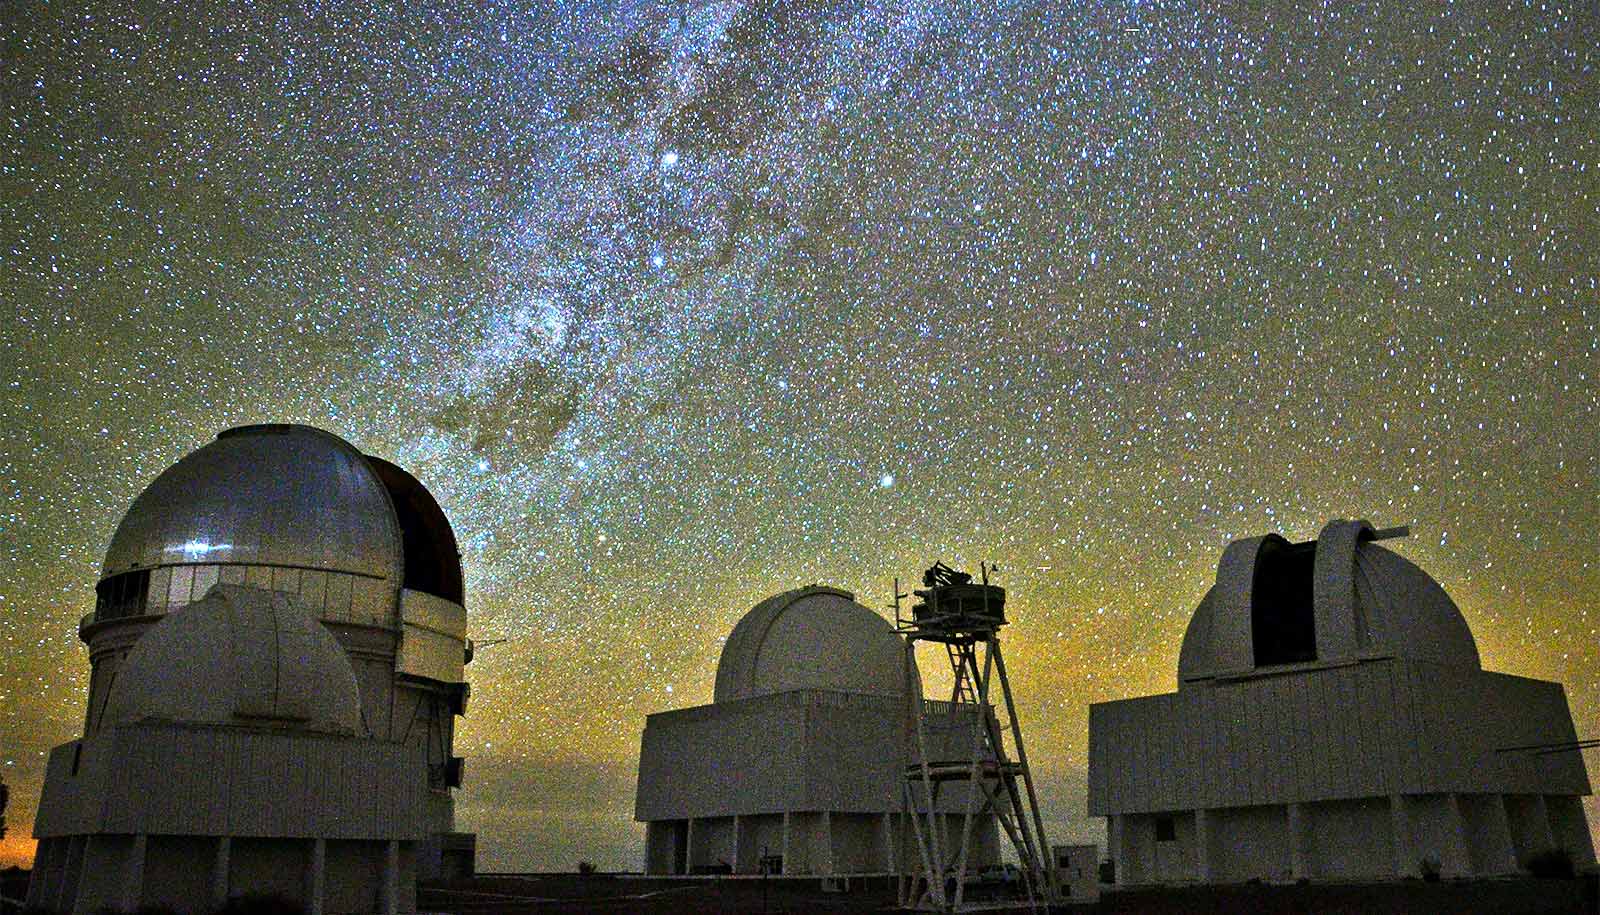 Telescopes point up at the starry night sky.